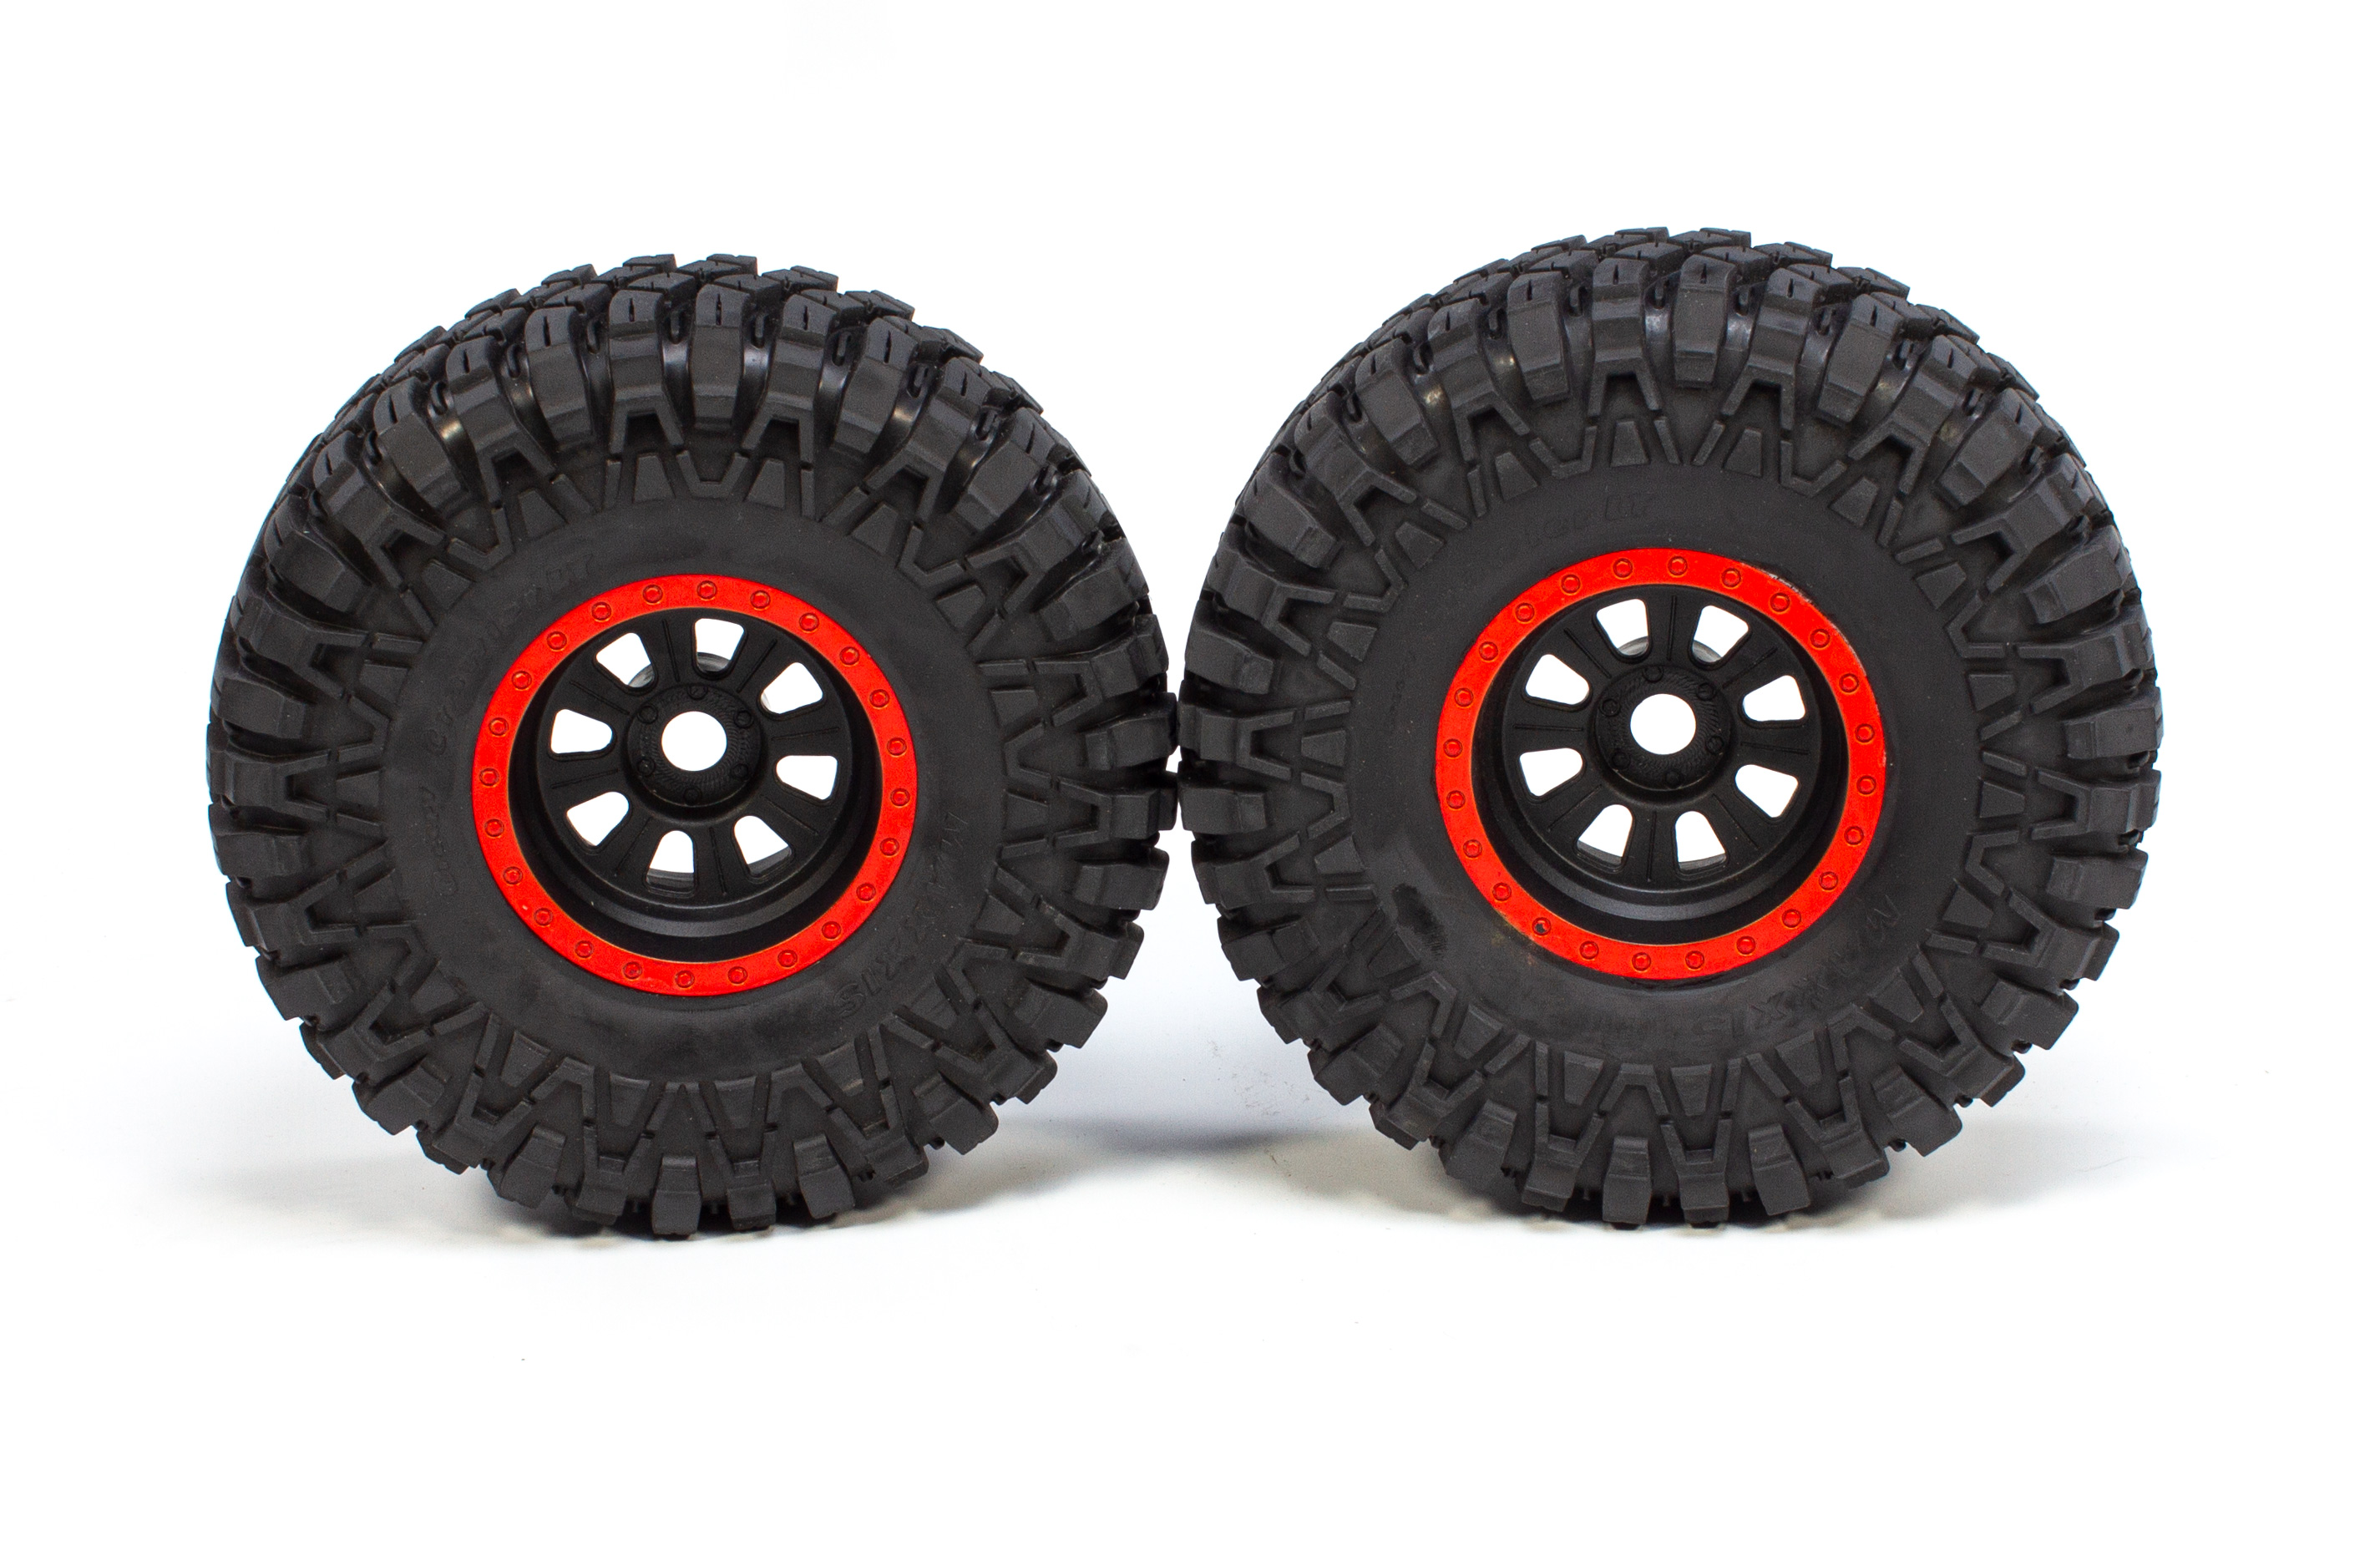 LOS45030/01 Losi Maxxis Creepy Crawler LT tyres with rims, mounted for Super Rock Rey